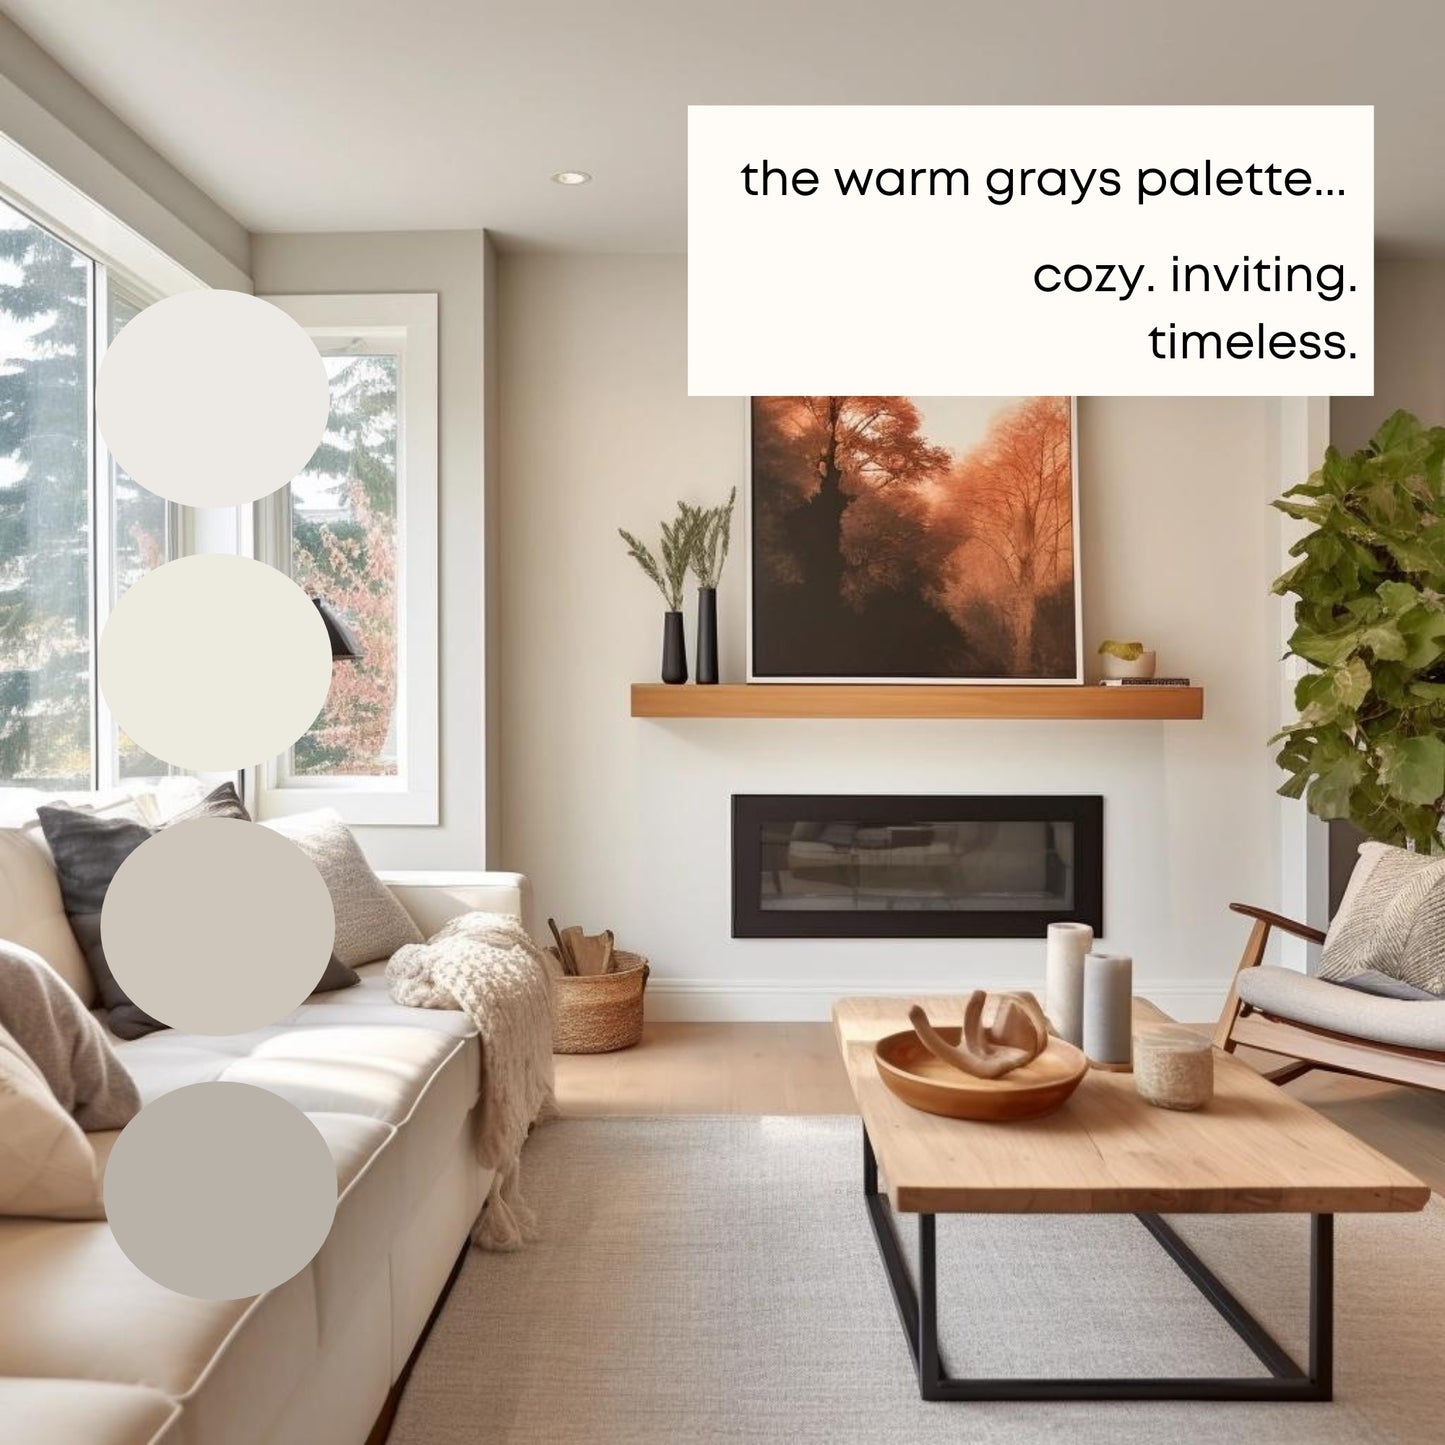 Warm Grays Sherwin Williams Paint Palette - Modern Neutral Interior Paint Colors for Home - Coordinating Interior Design Color Palette, Sherwin Williams, Worldly Gray